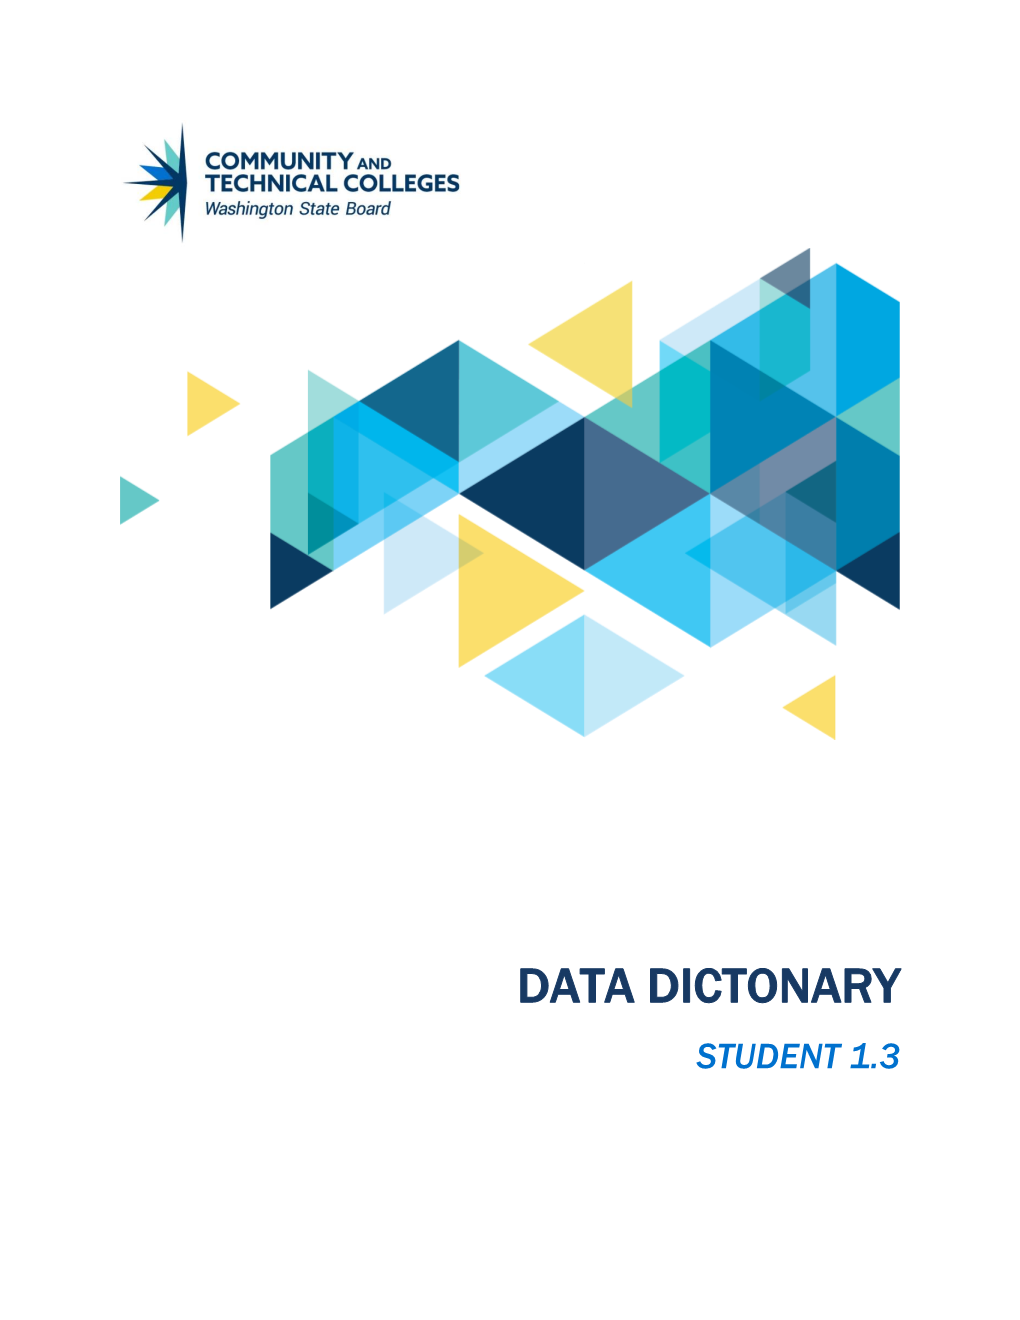 Student Data Dictionary